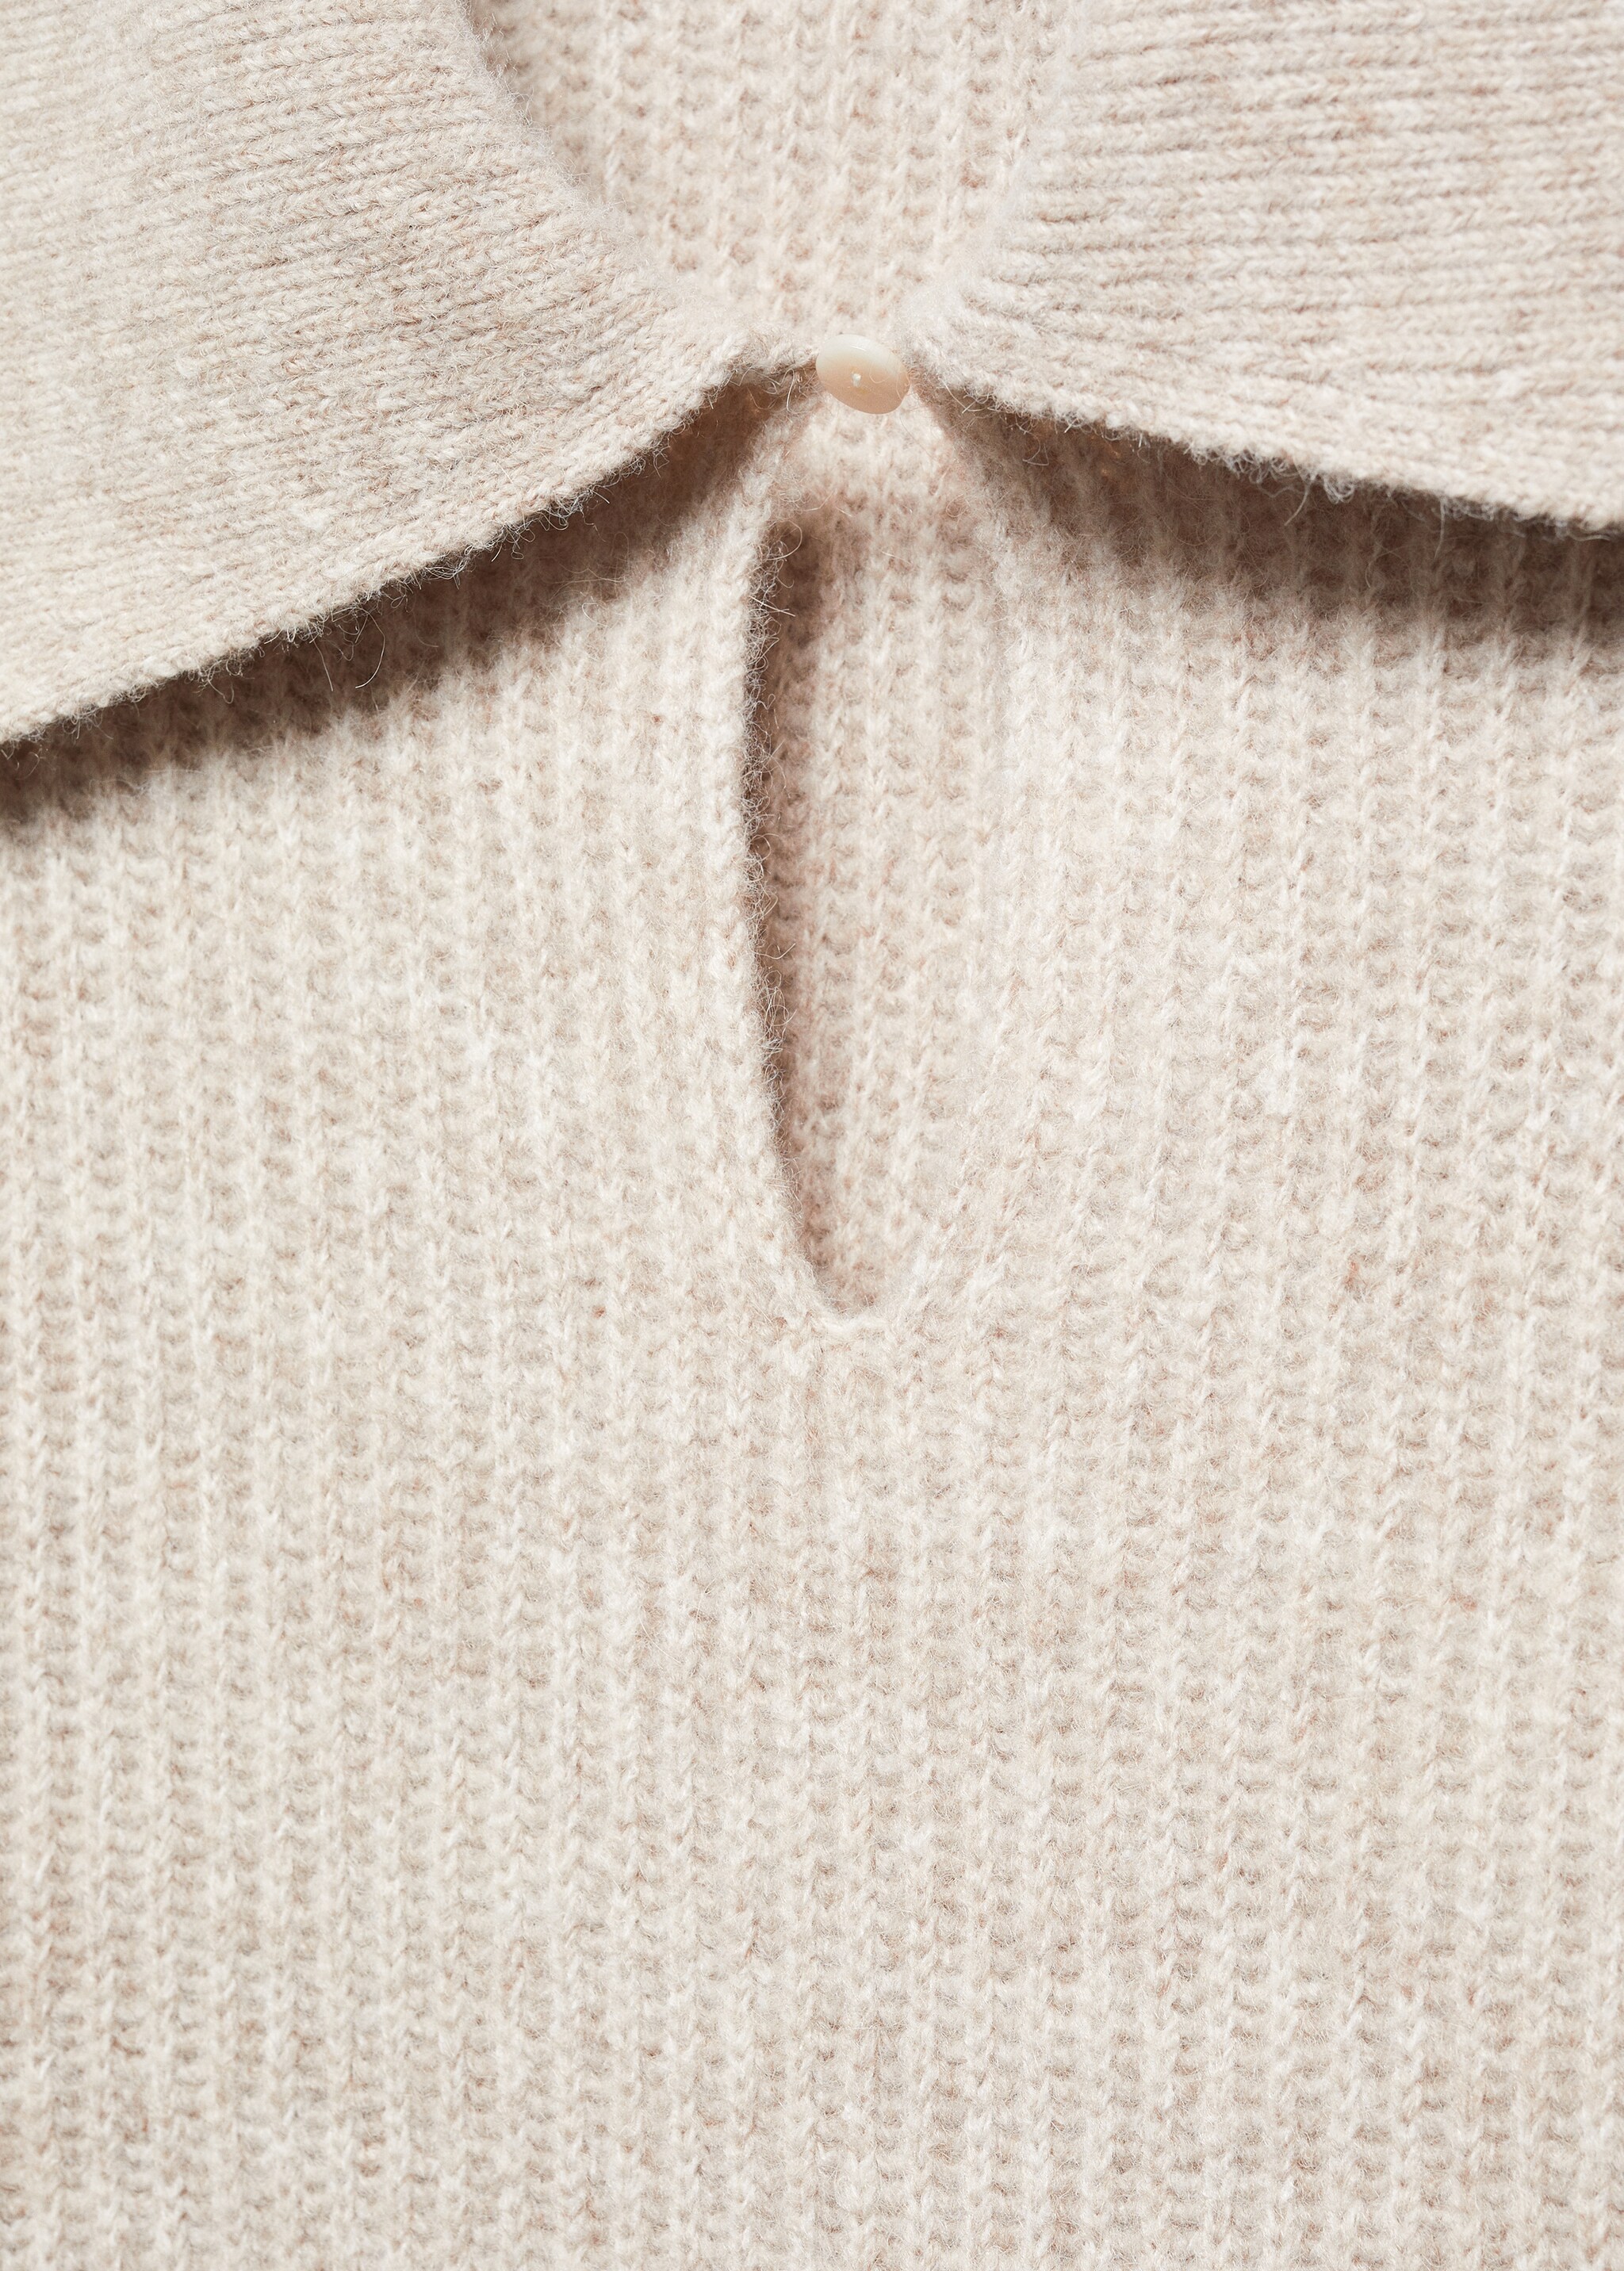 Camp-collar knit sweater - Details of the article 8